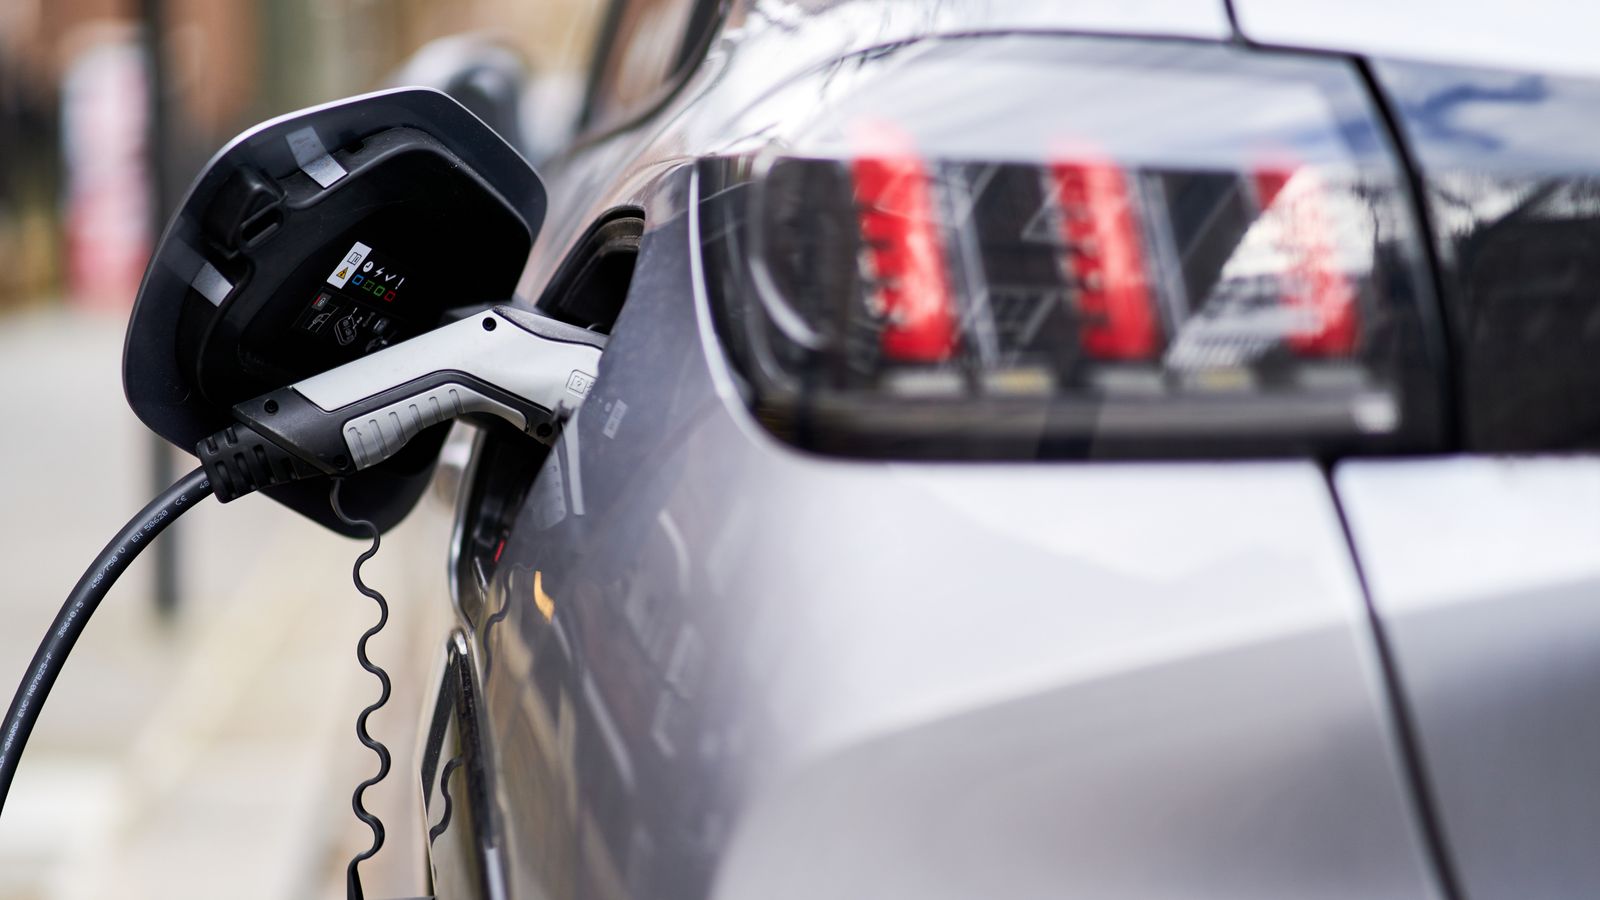 Drivers leasing new electric cars being overcharged by hundreds of pounds each month, claims clean transport group